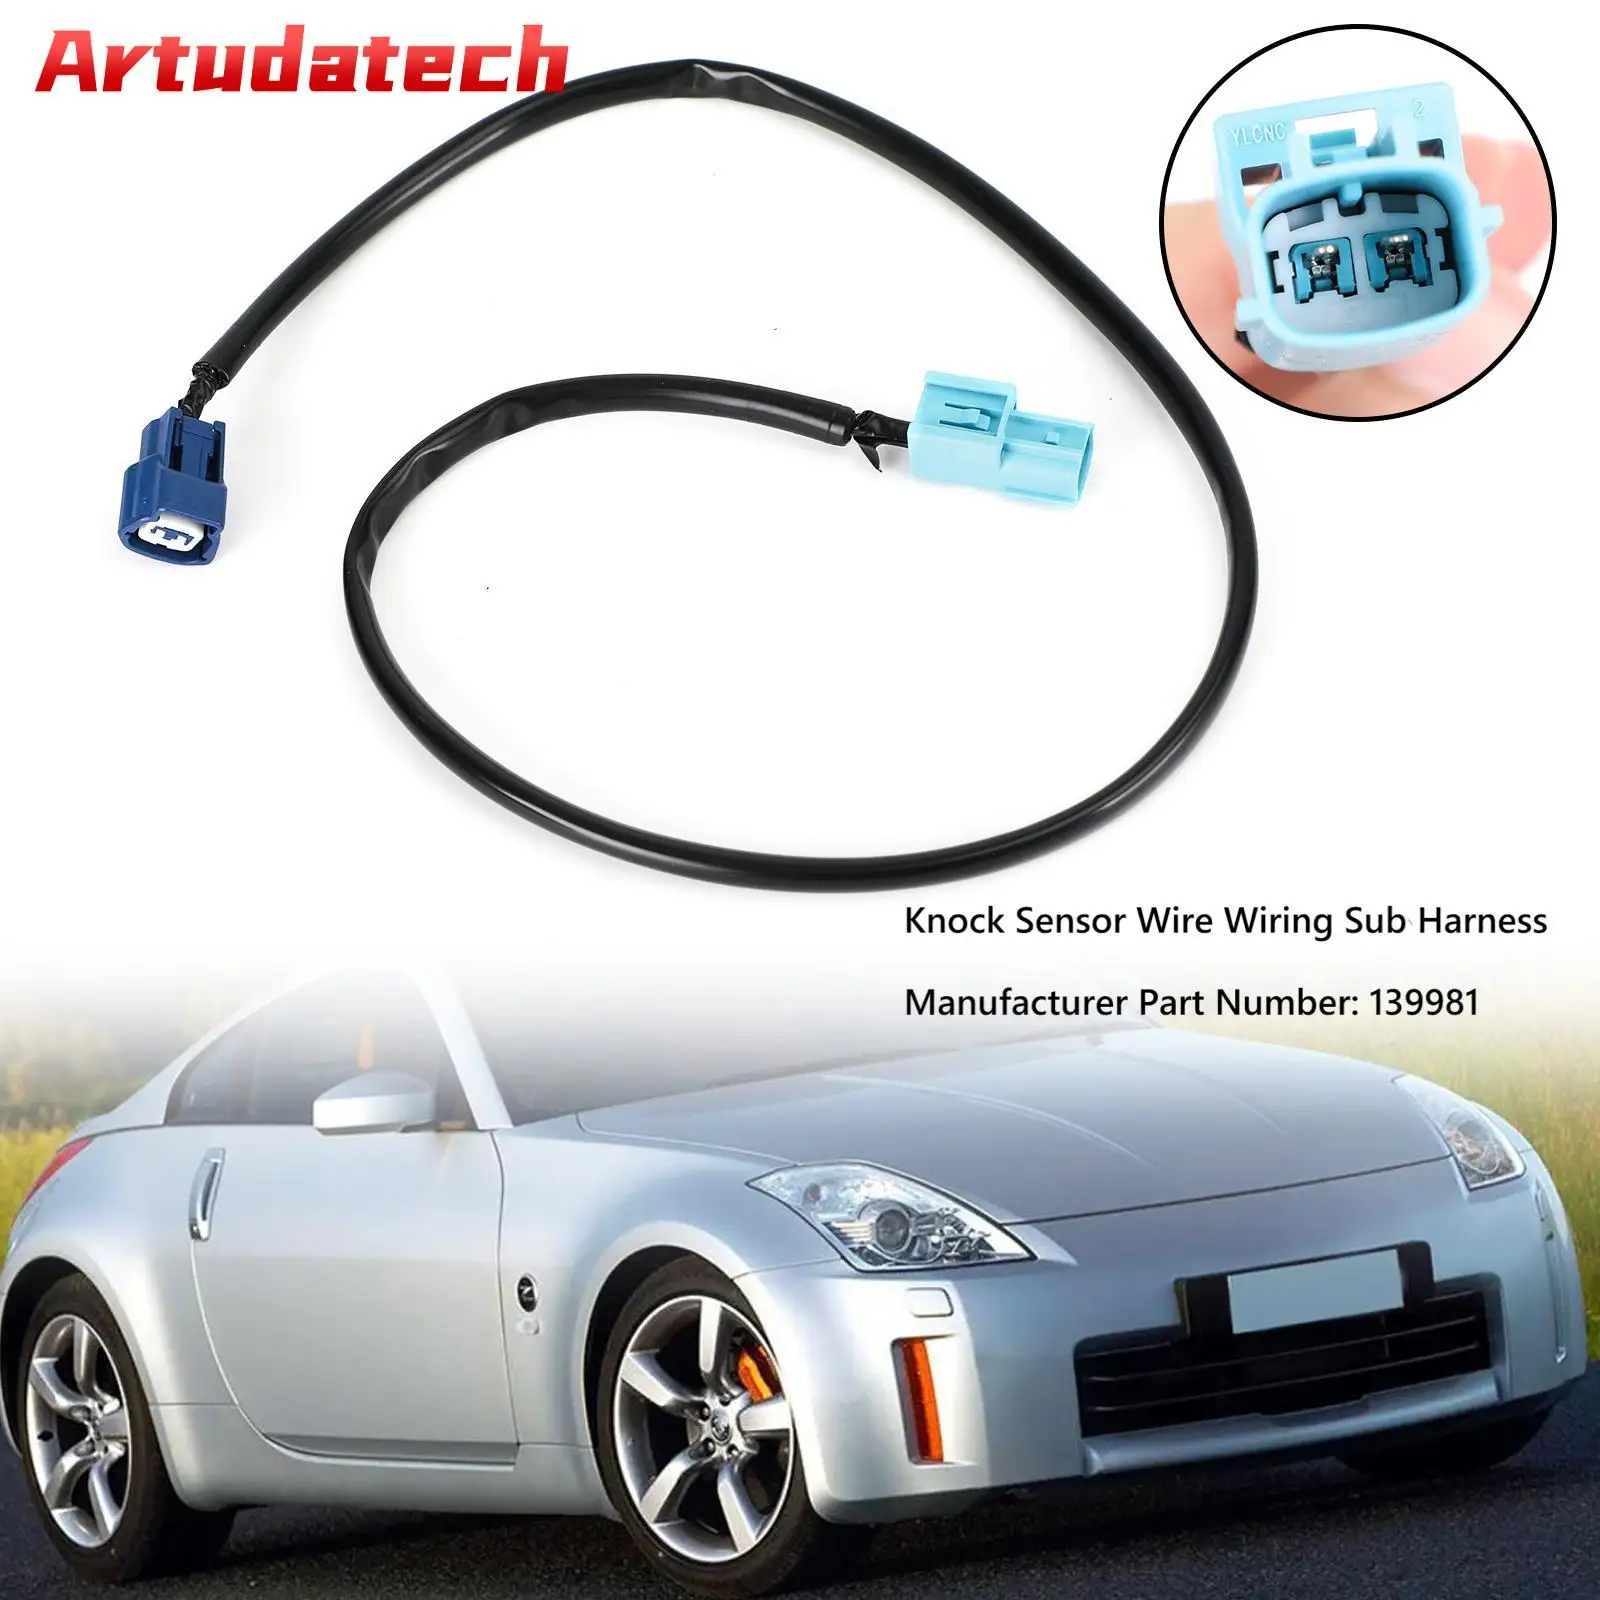 

Artudatech Knock Sensor Cable Wiring Harness 139981 For Nissan 350Z Infiniti G35 FX35 Car Accessories